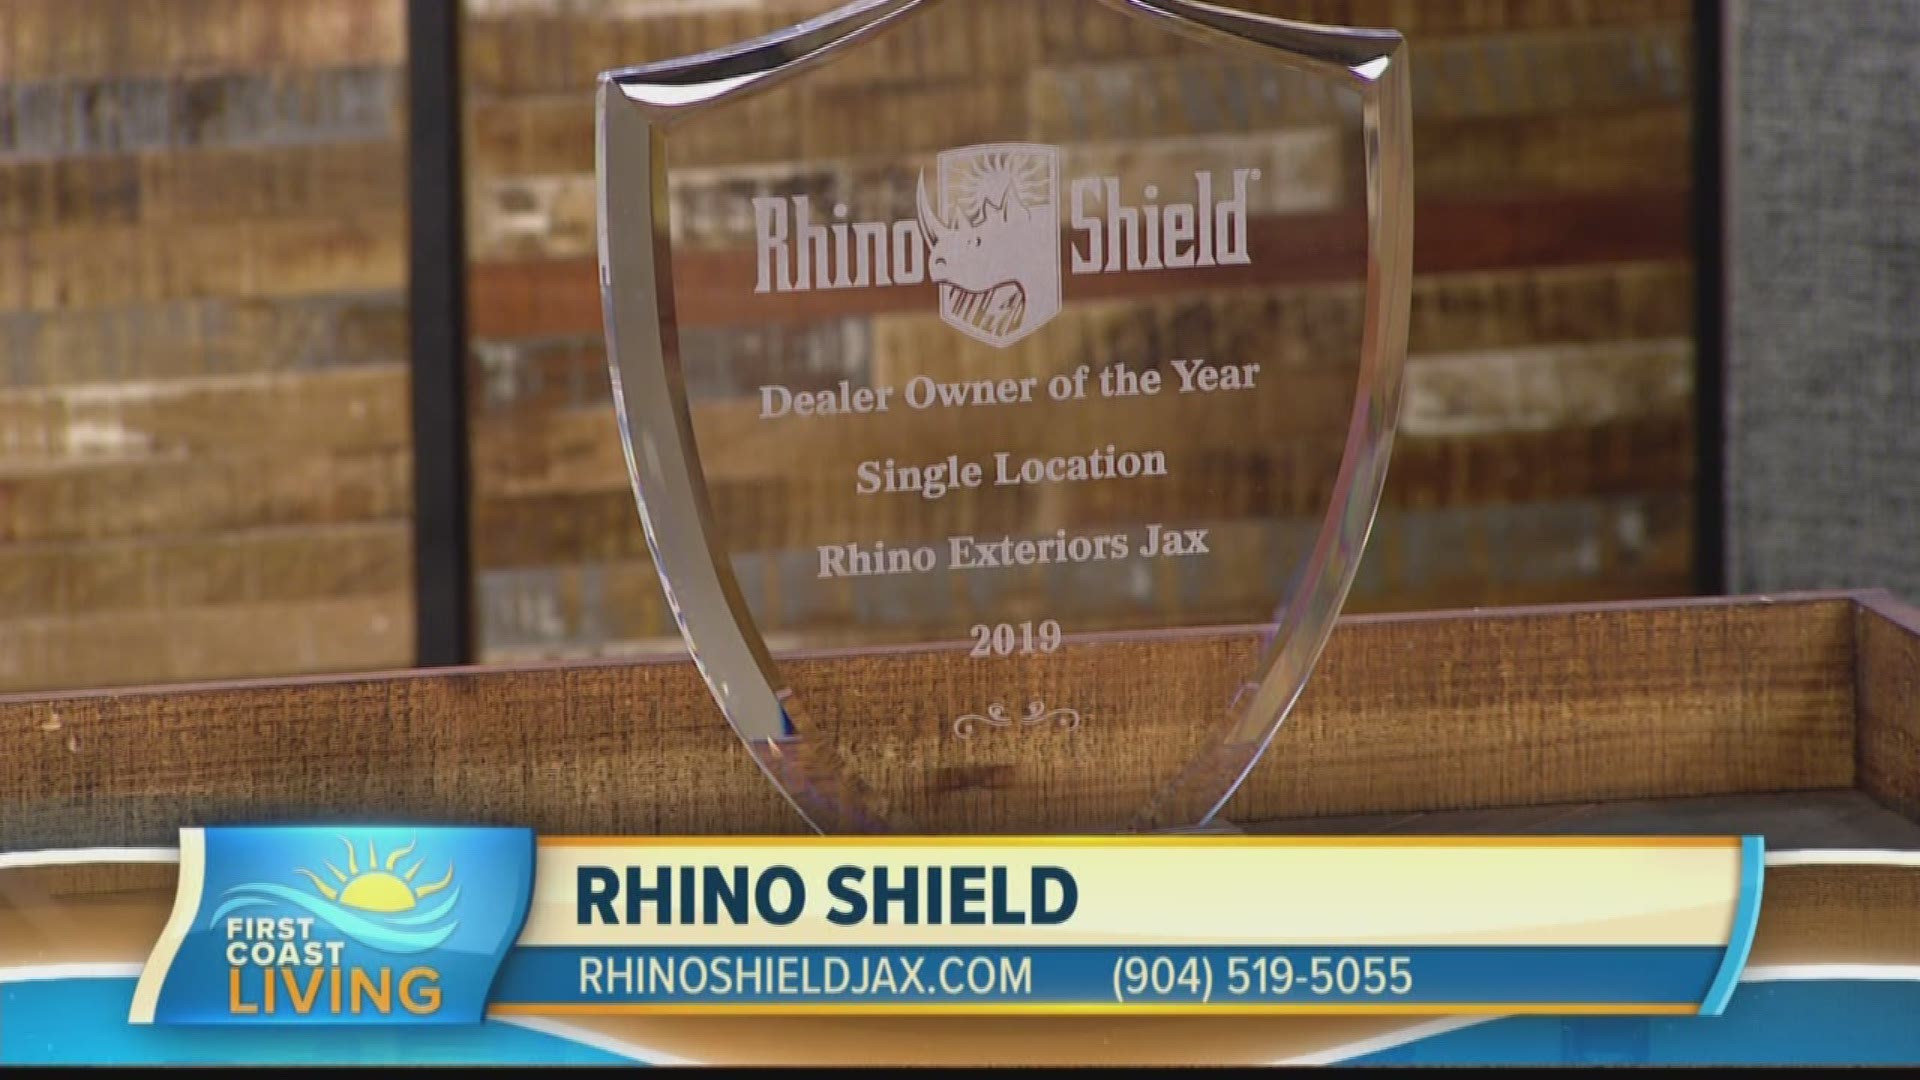 There's a reason customers use and trust Rhino Shield!